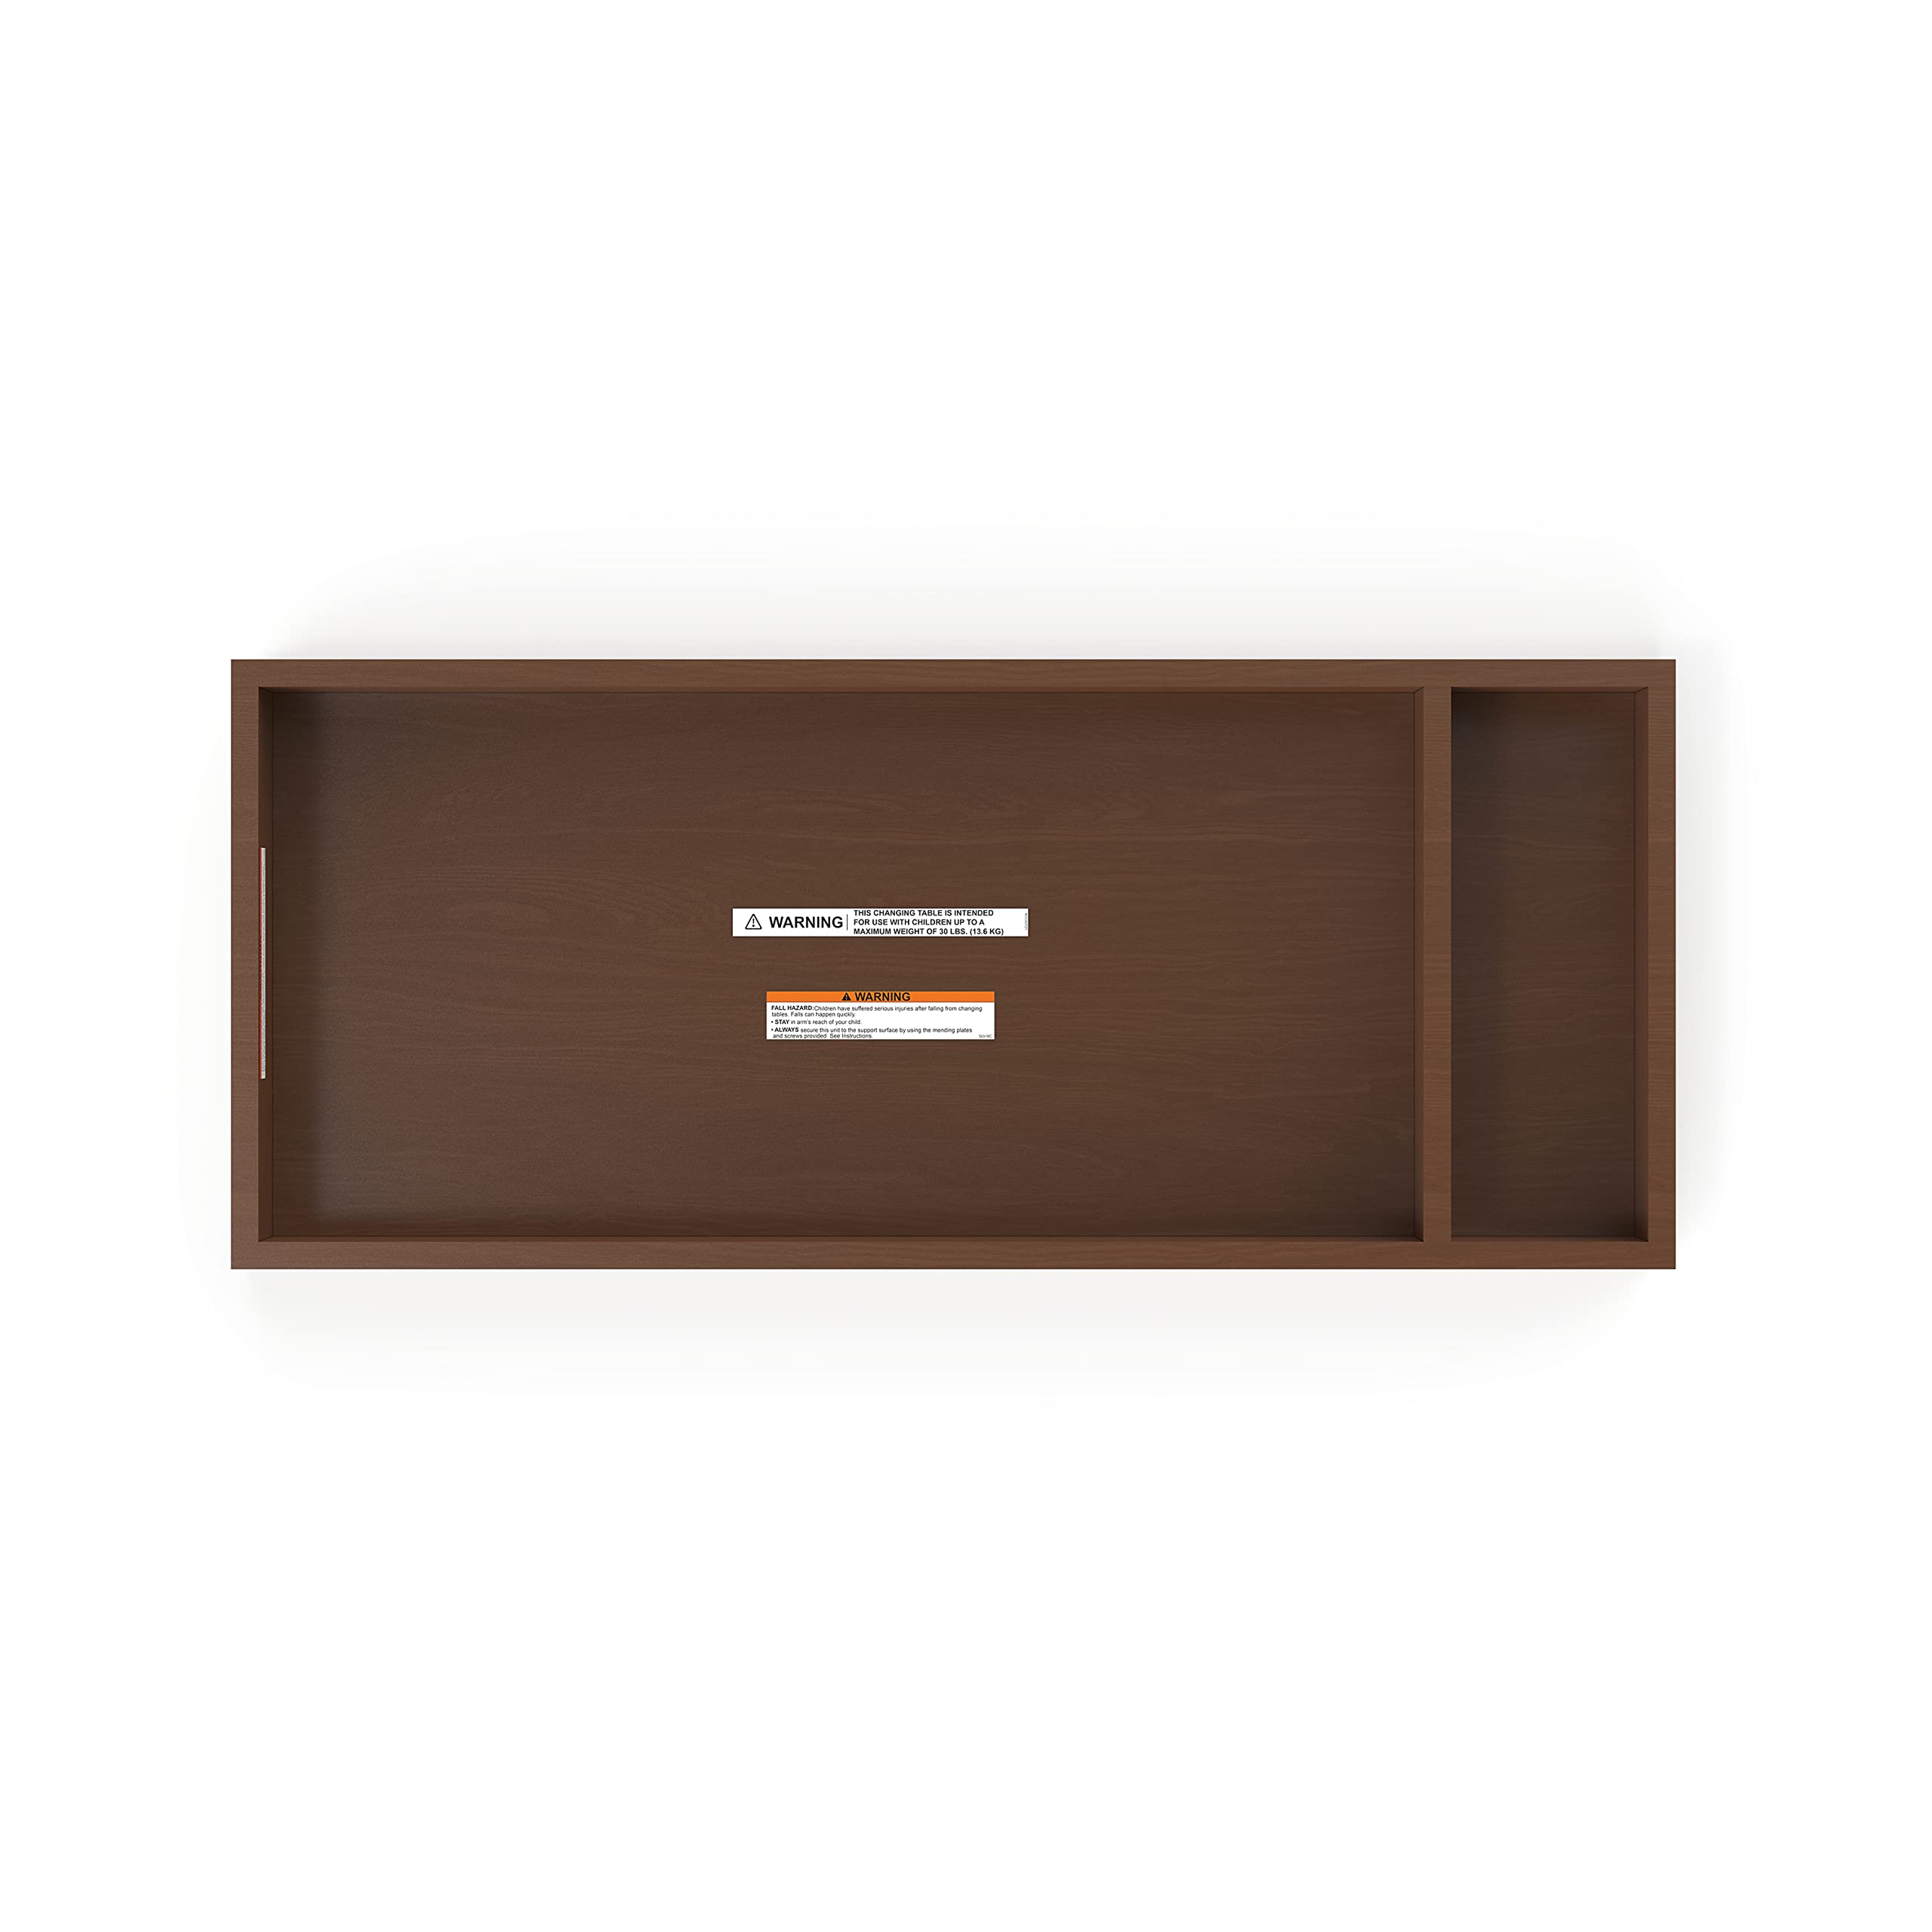 Child Craft Kieran Changing Table Topper for Dresser, Brown, Toasted Chestnut